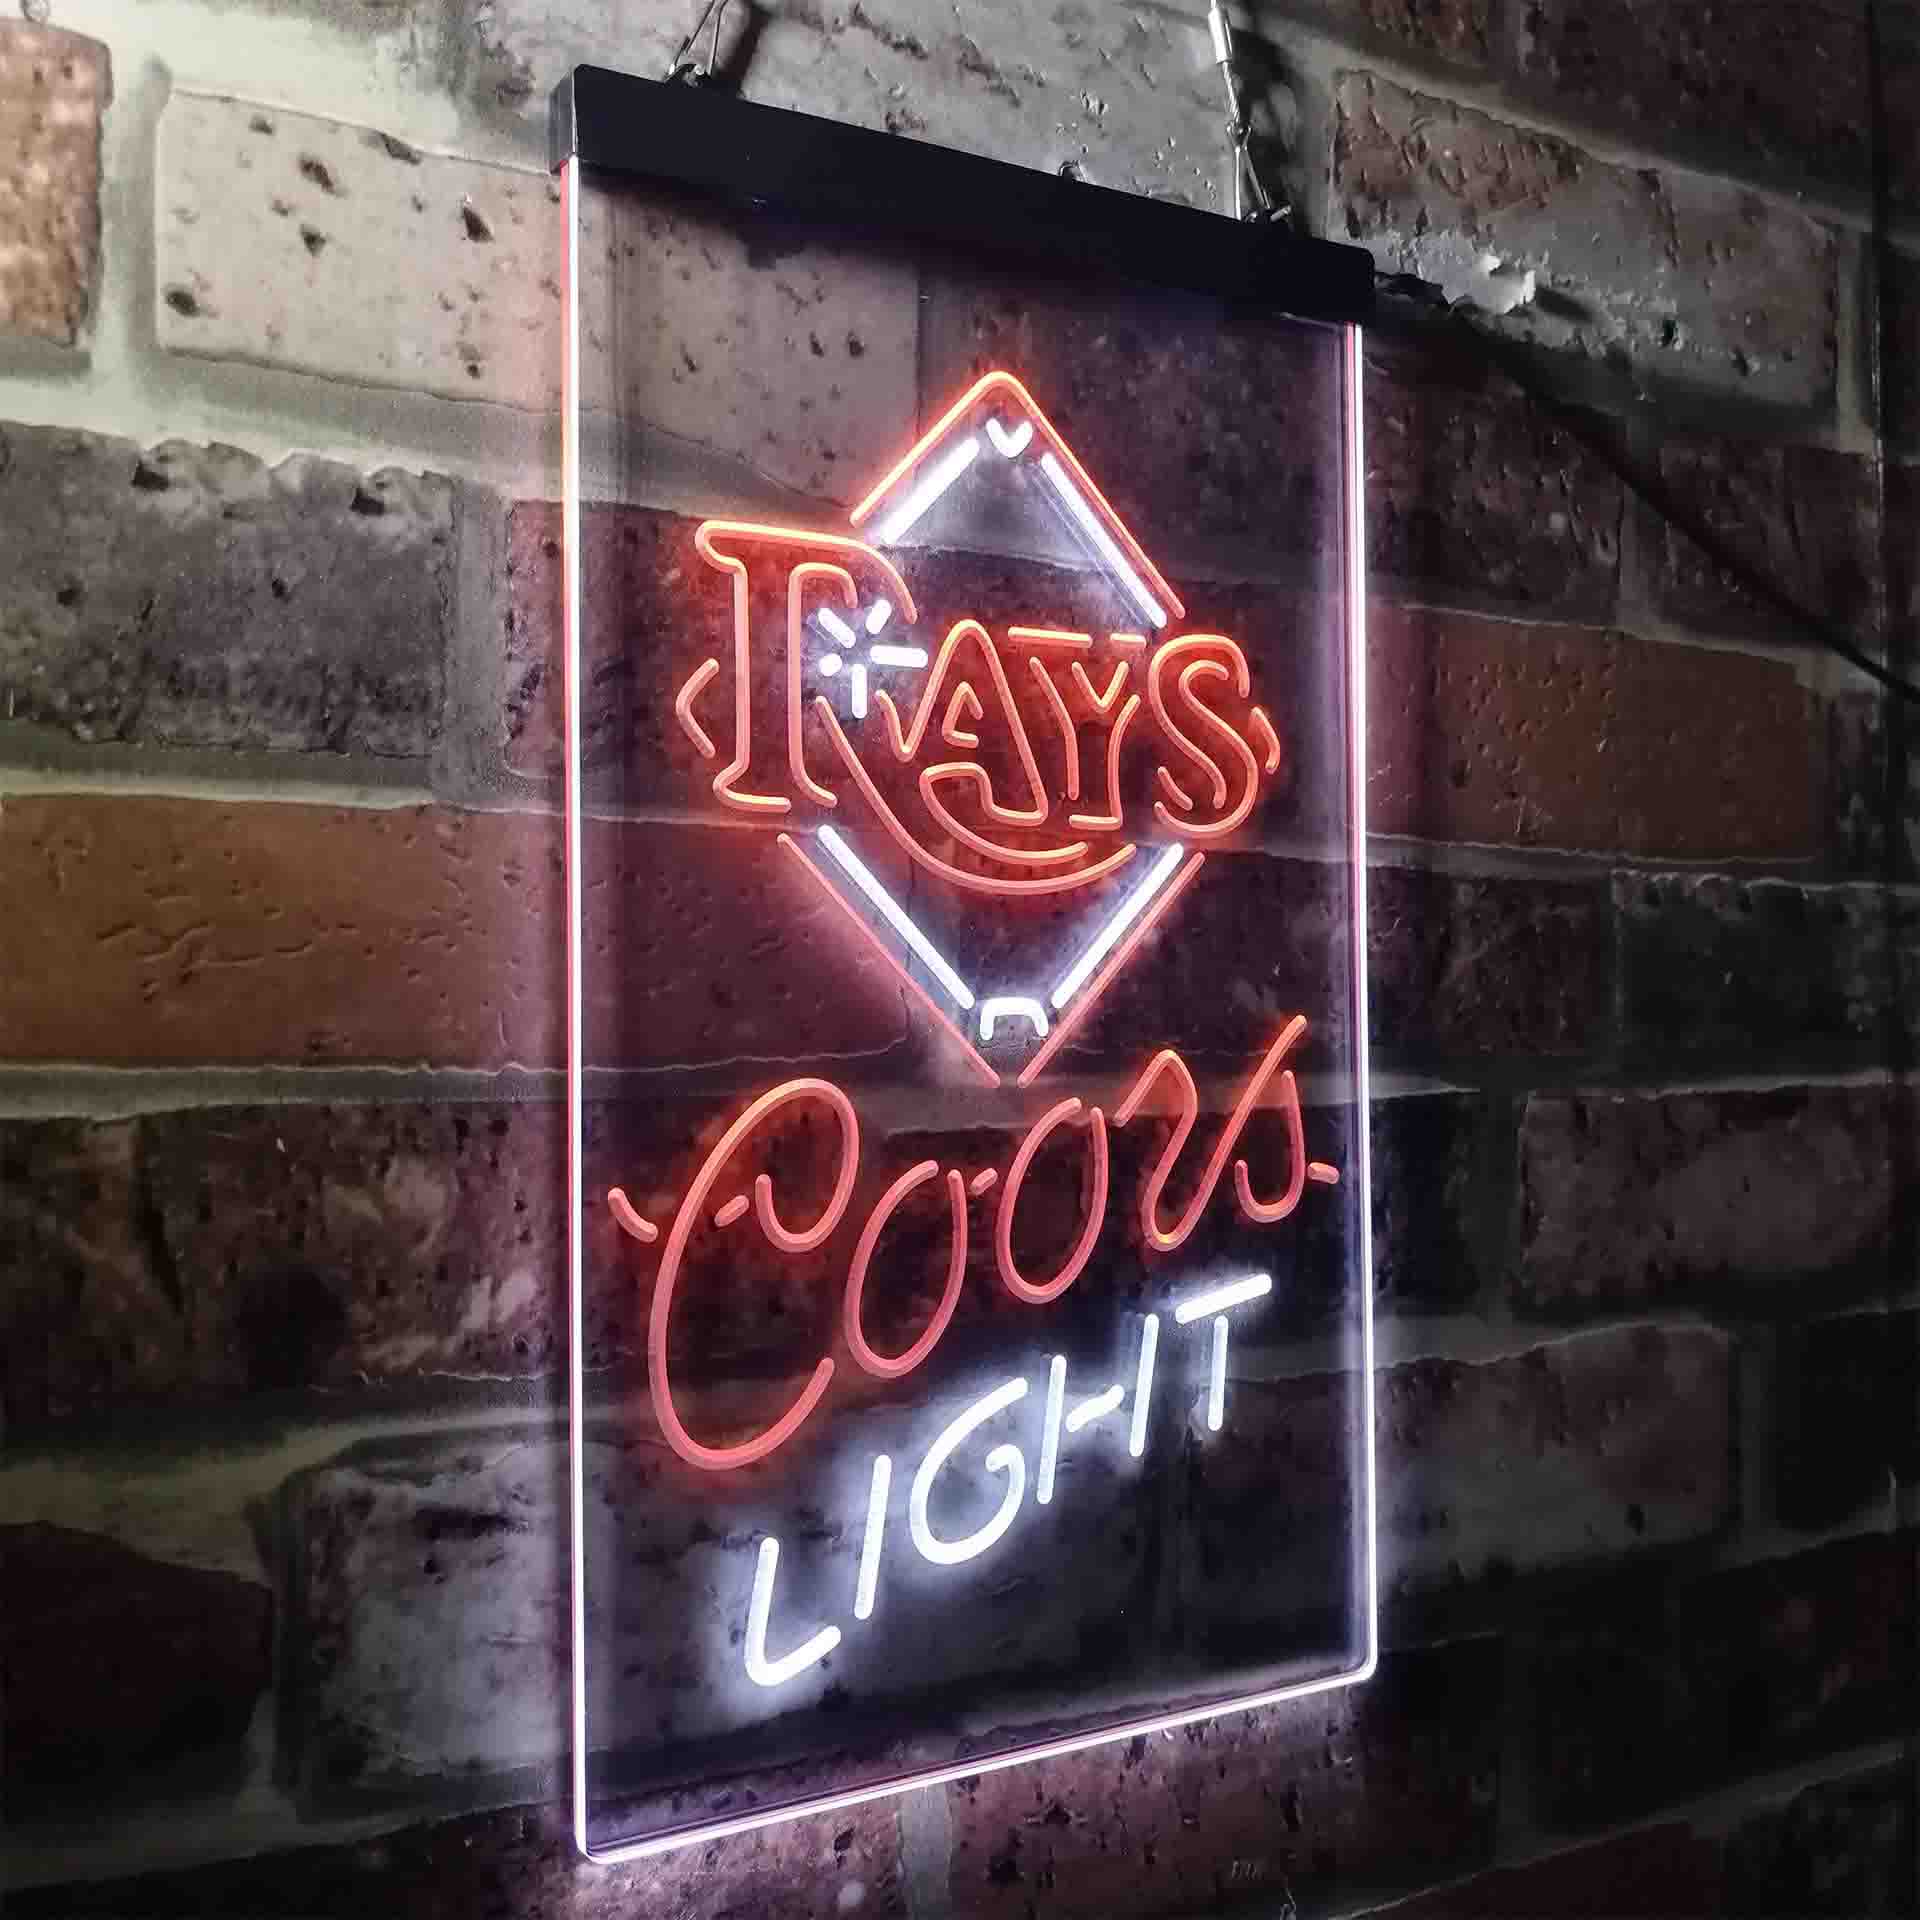 Tampa Bay Rays Coors Light Neon-Like LED Sign